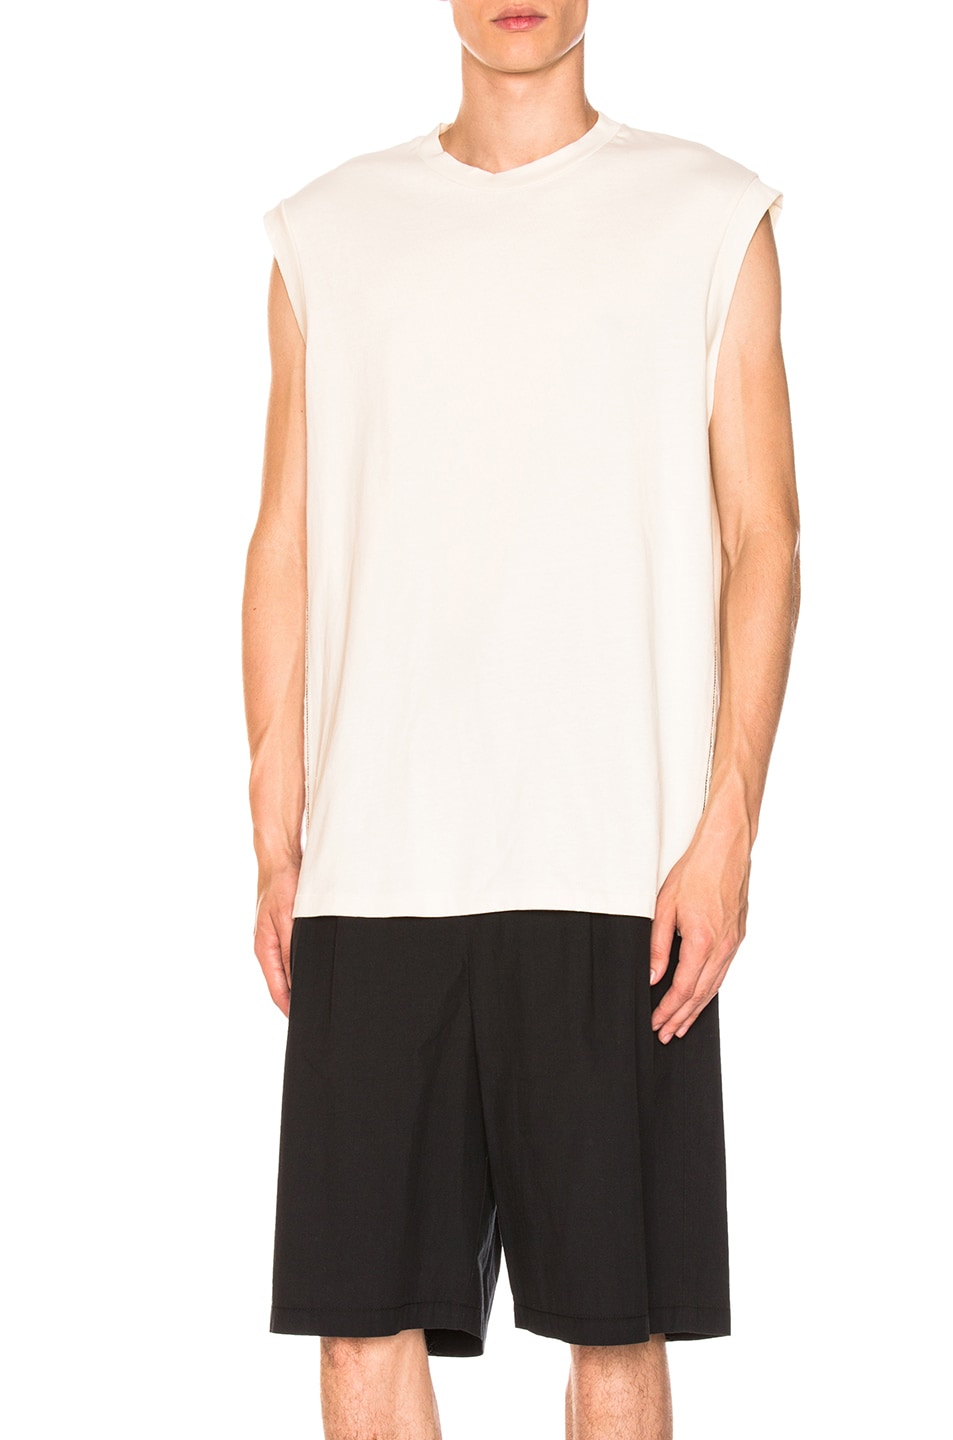 Image 1 of 3.1 phillip lim Re-Constructed Muscle Tee in Bone